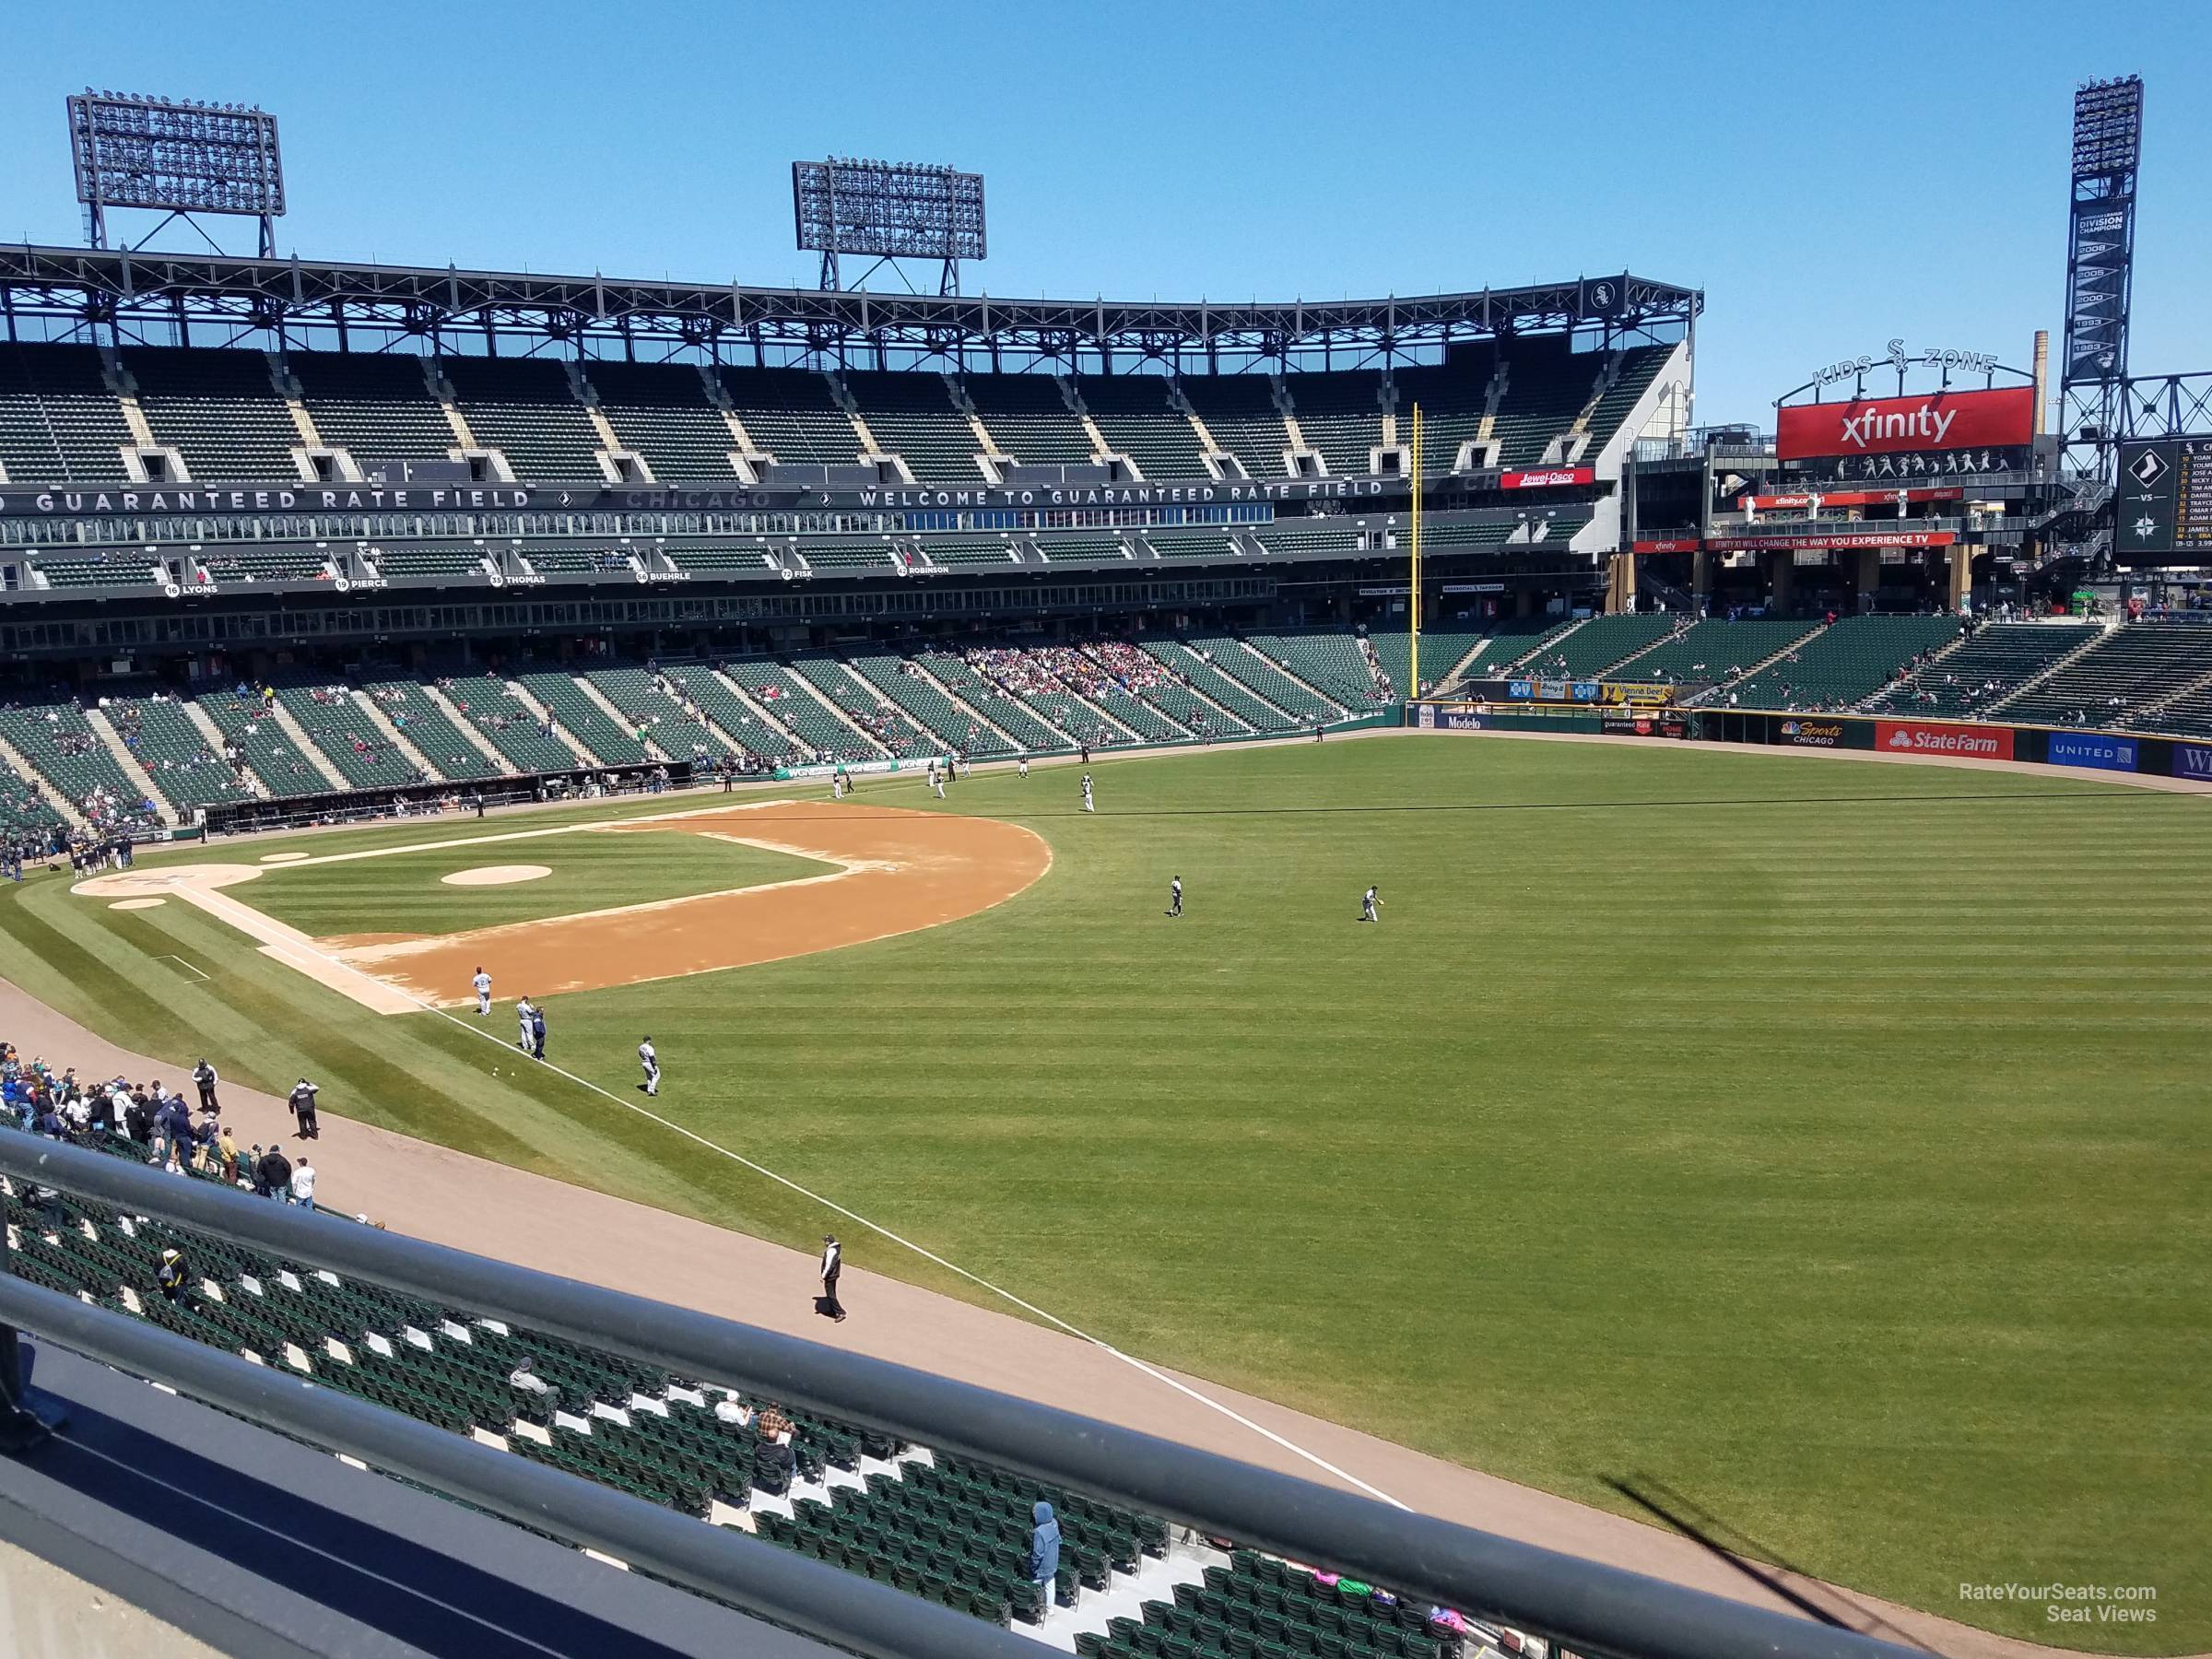 section 311, row 1 seat view  - guaranteed rate field